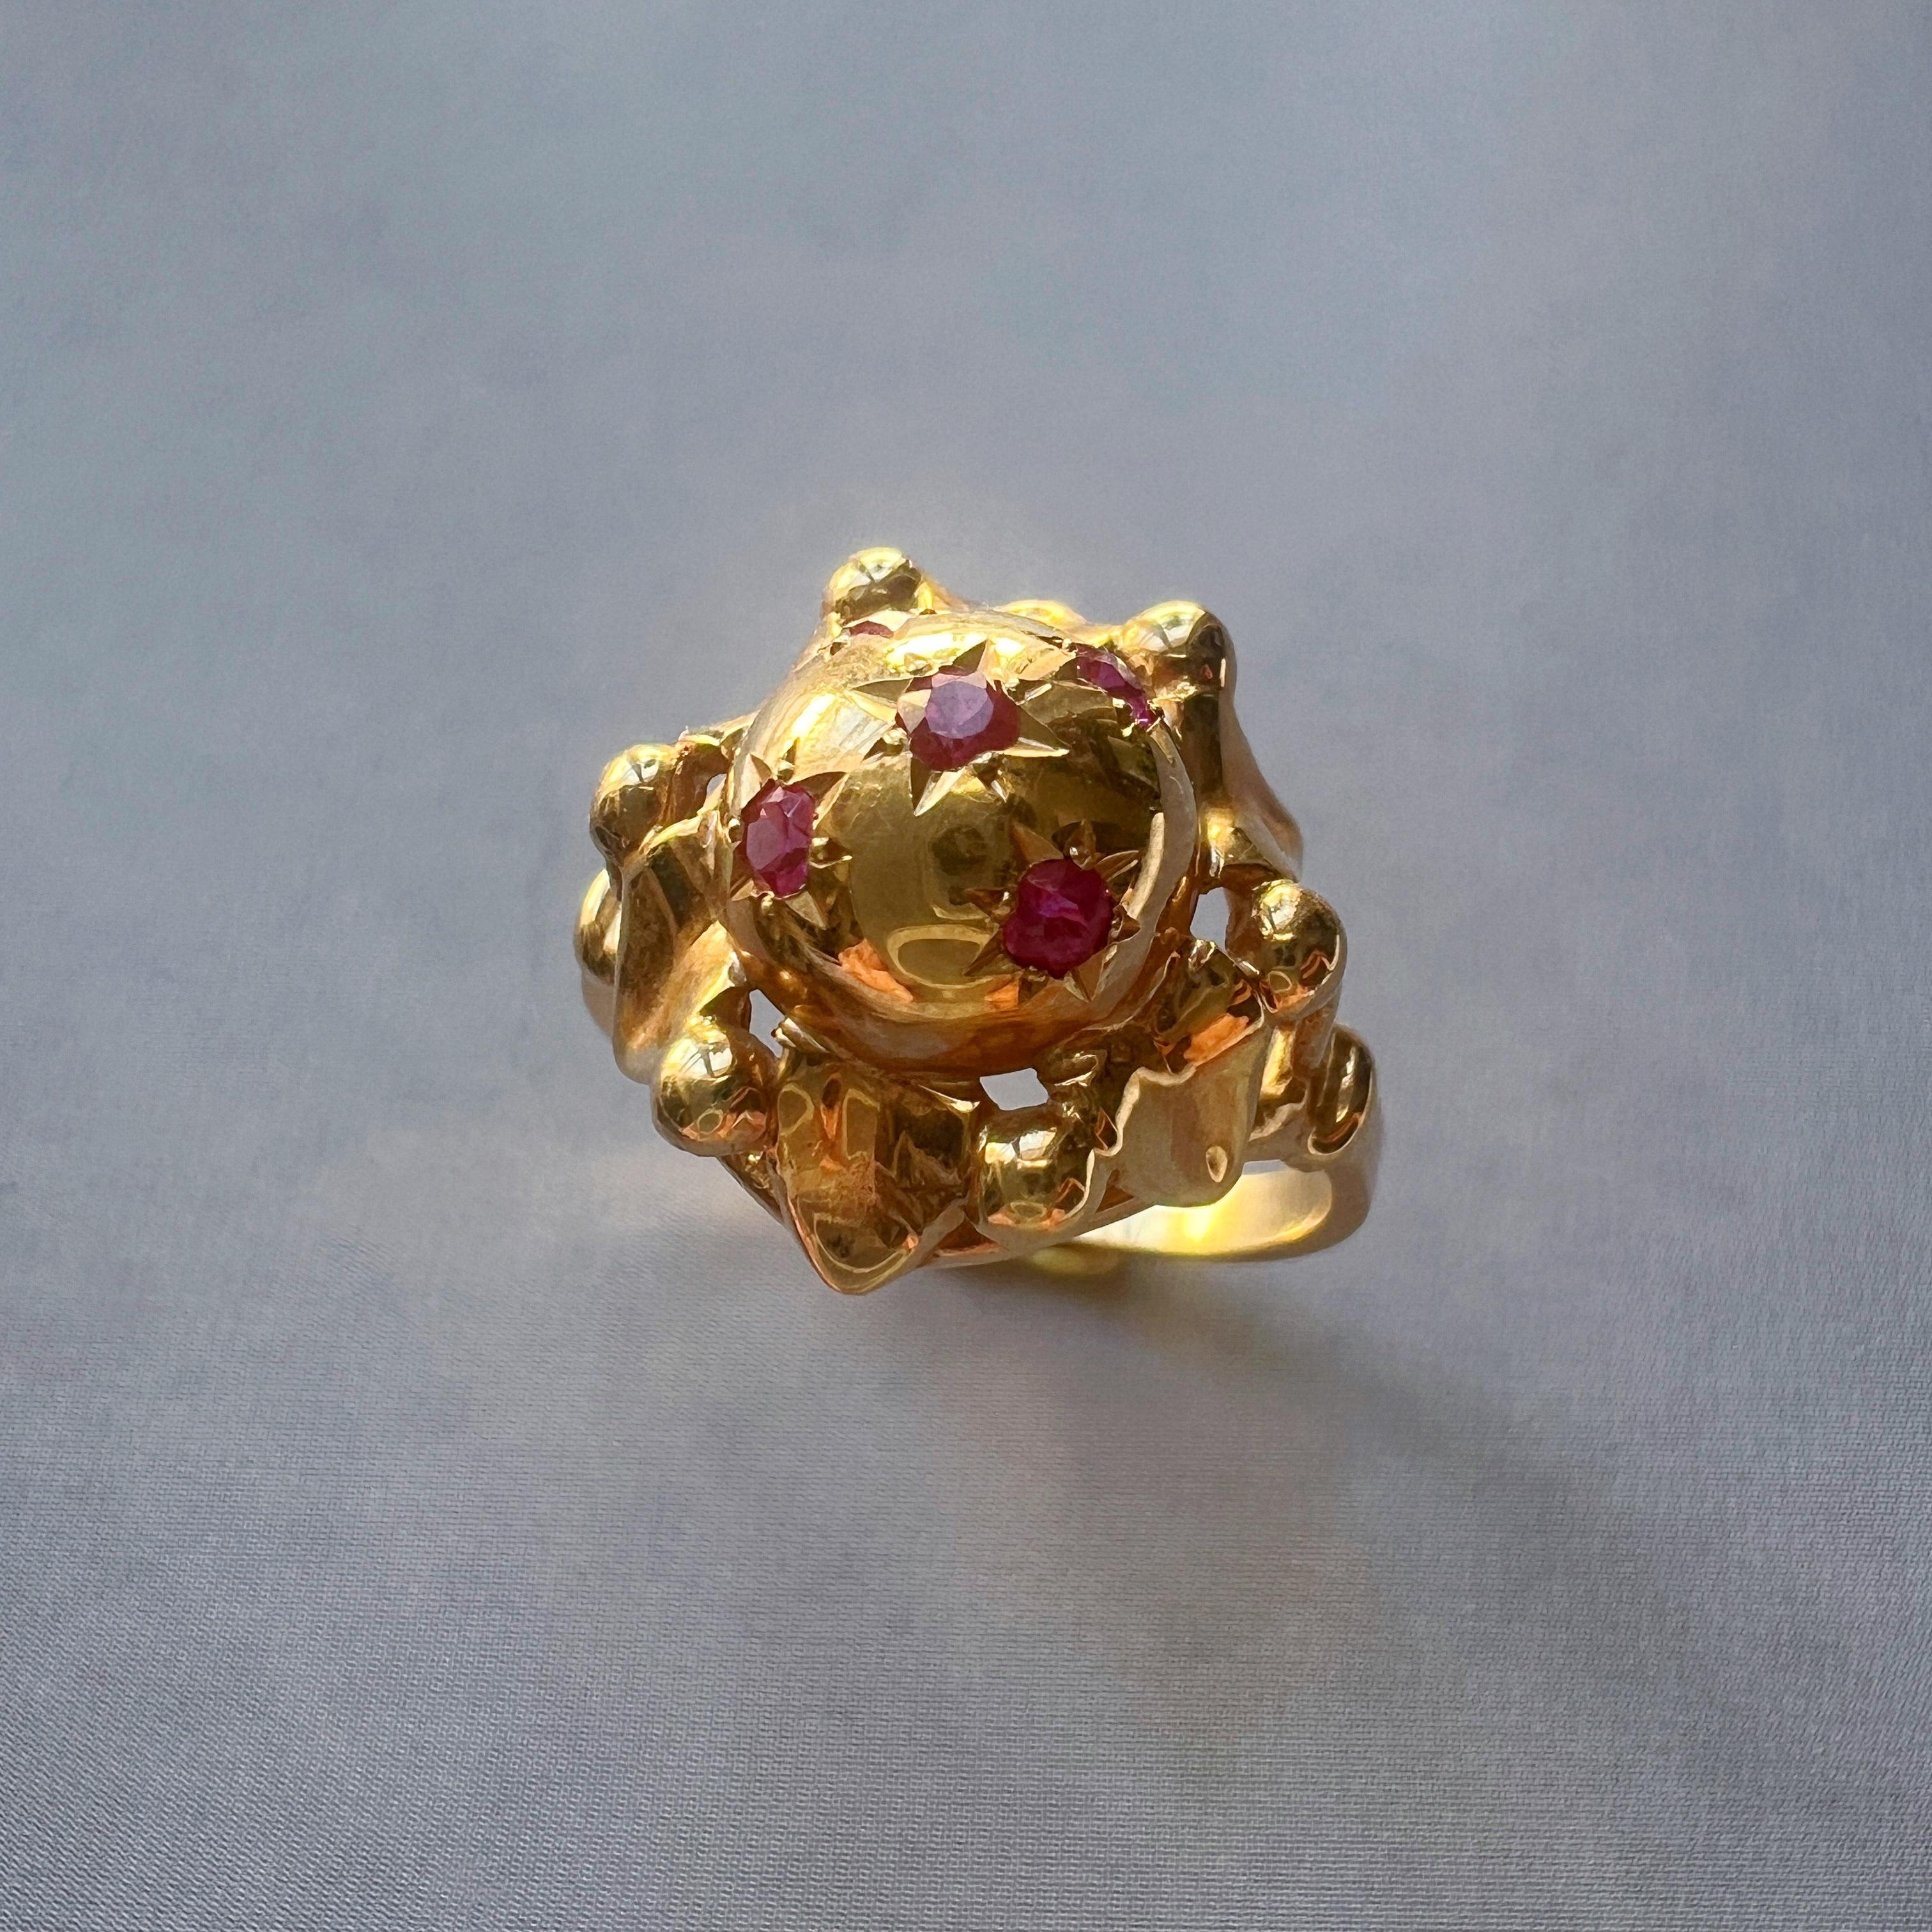 For sale a French retro 18K yellow gold bombé ring. The focal point of this ring is a gracefully rounded sphere, reminiscent of a French dessert 